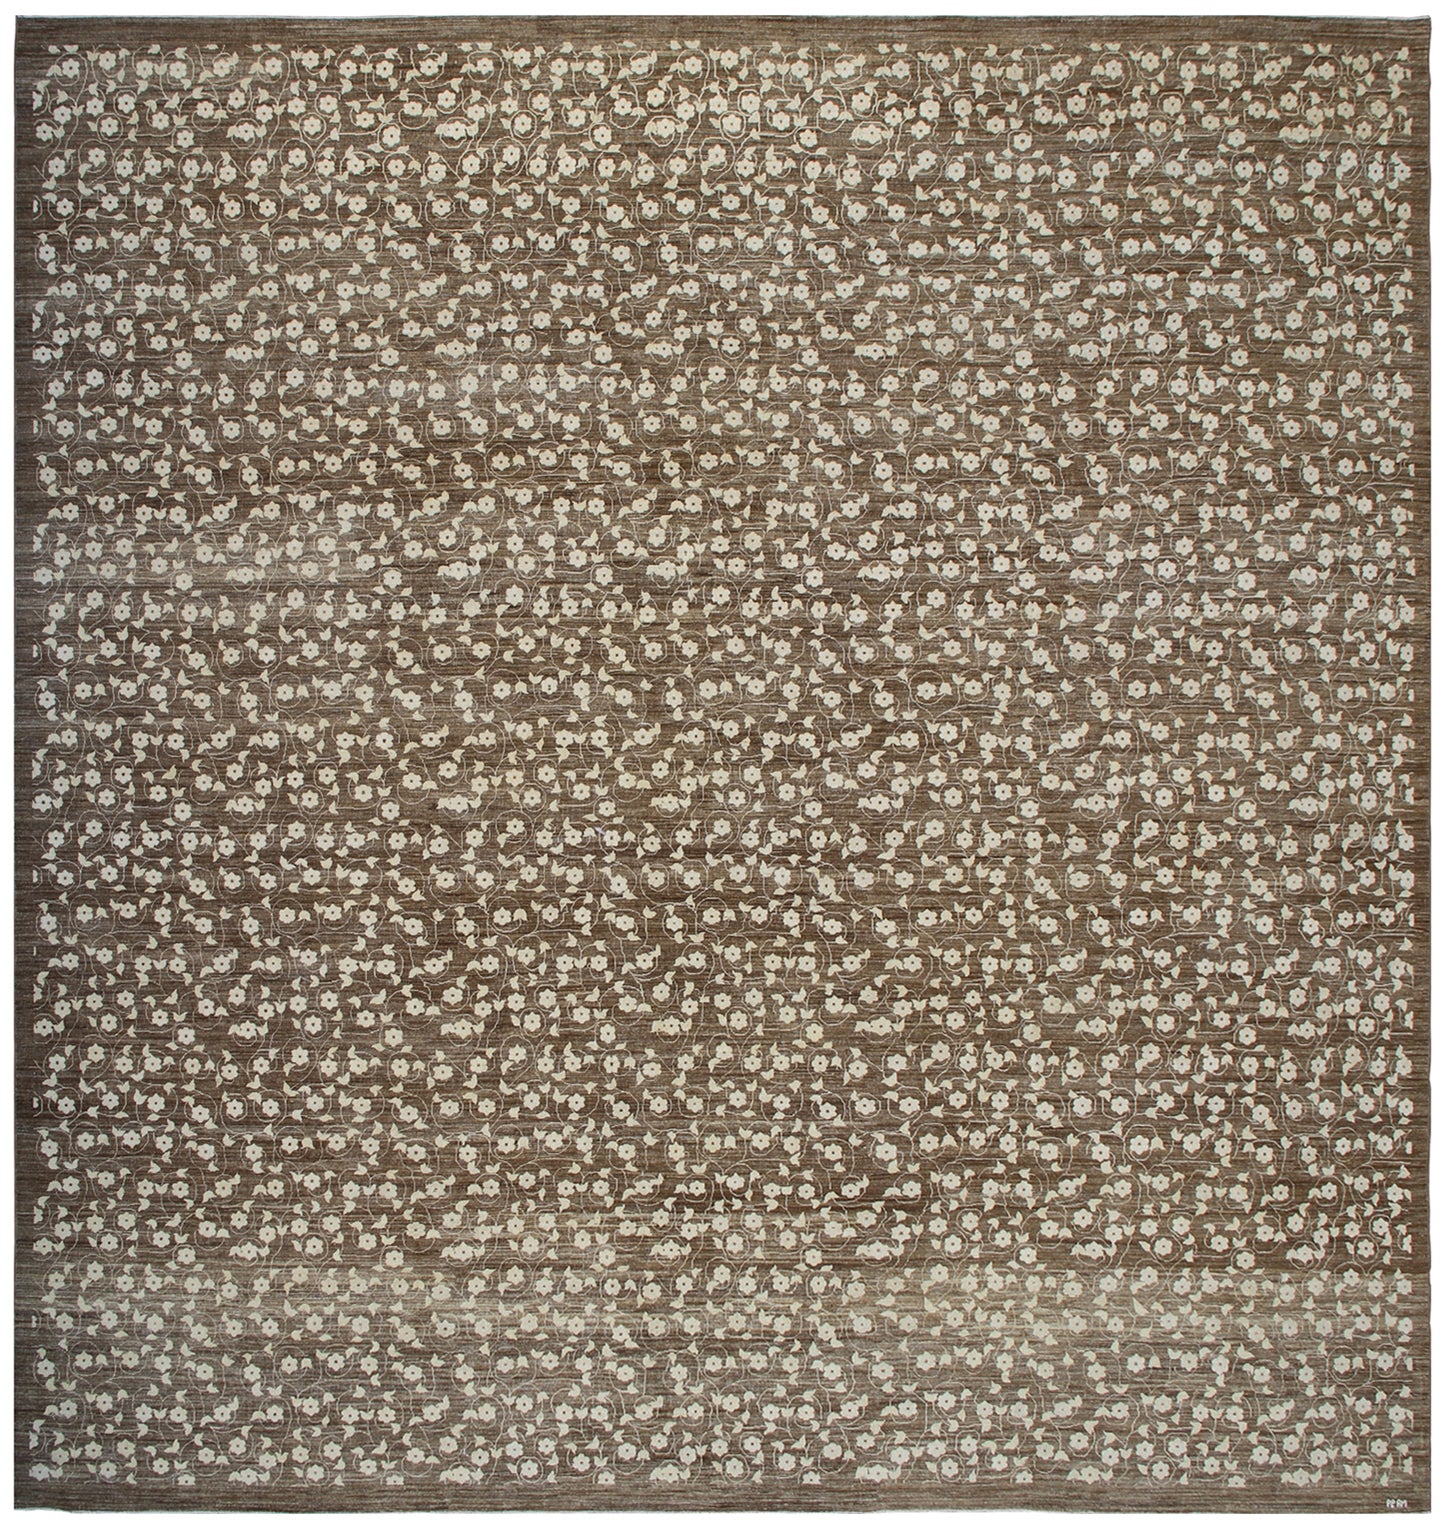 12'x12' Square Floral Design Fine Ariana Transitional Rug